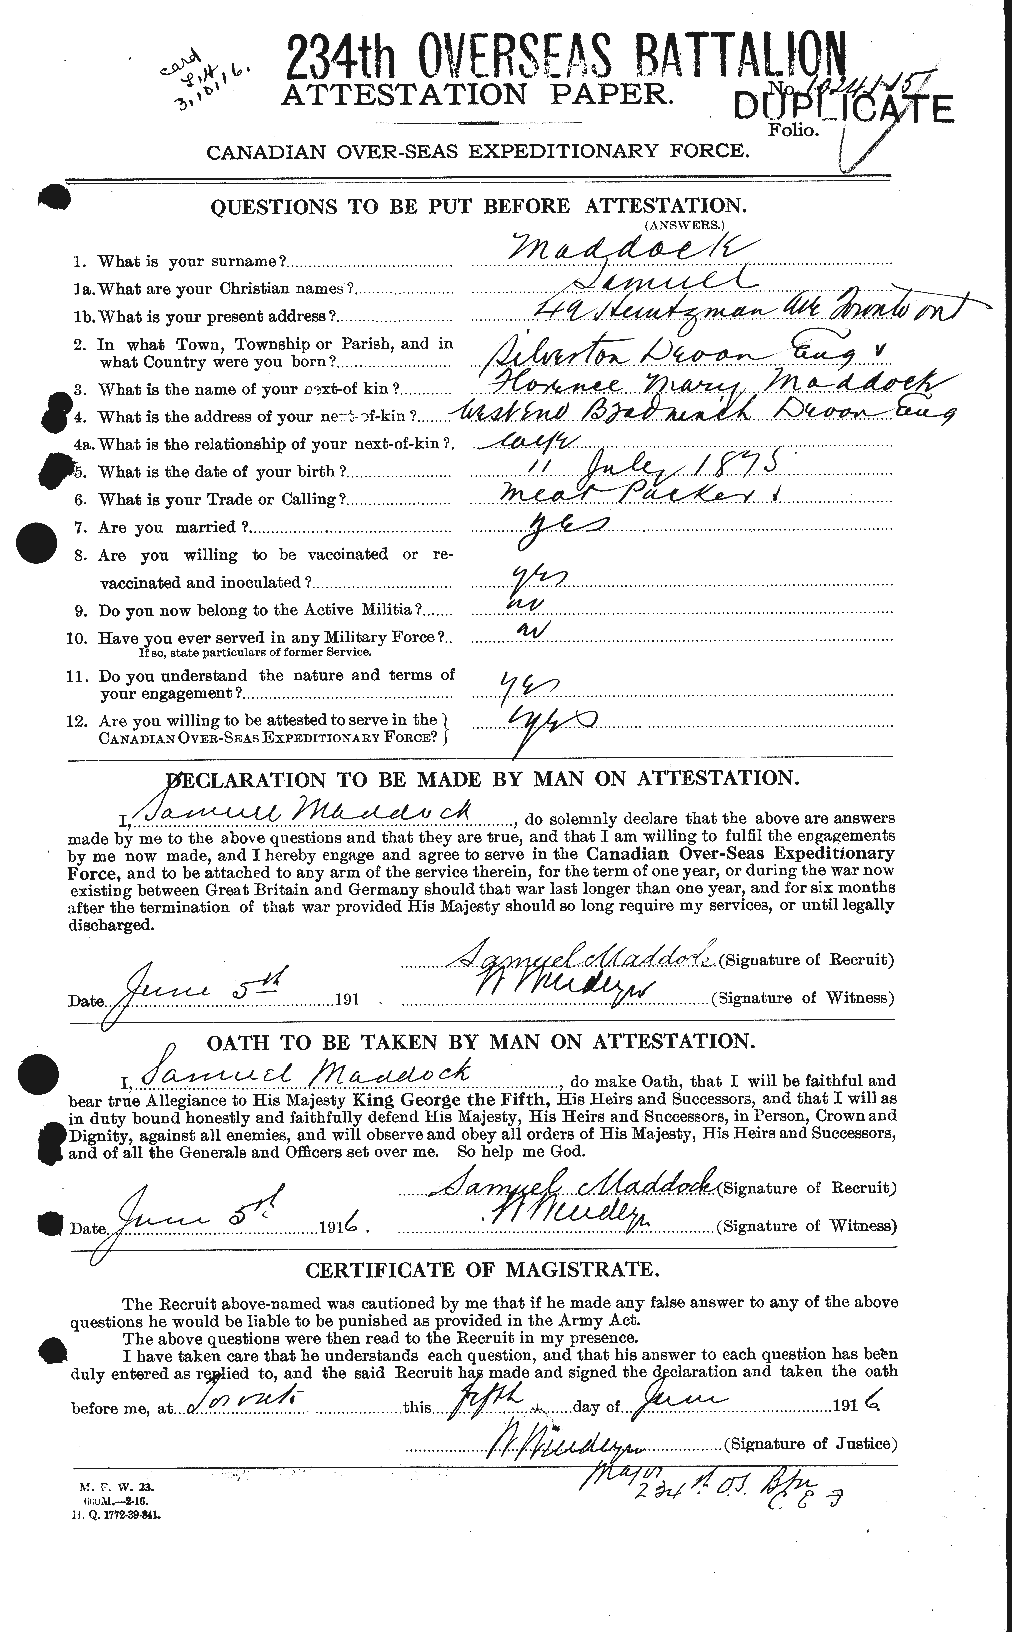 Personnel Records of the First World War - CEF 474797a